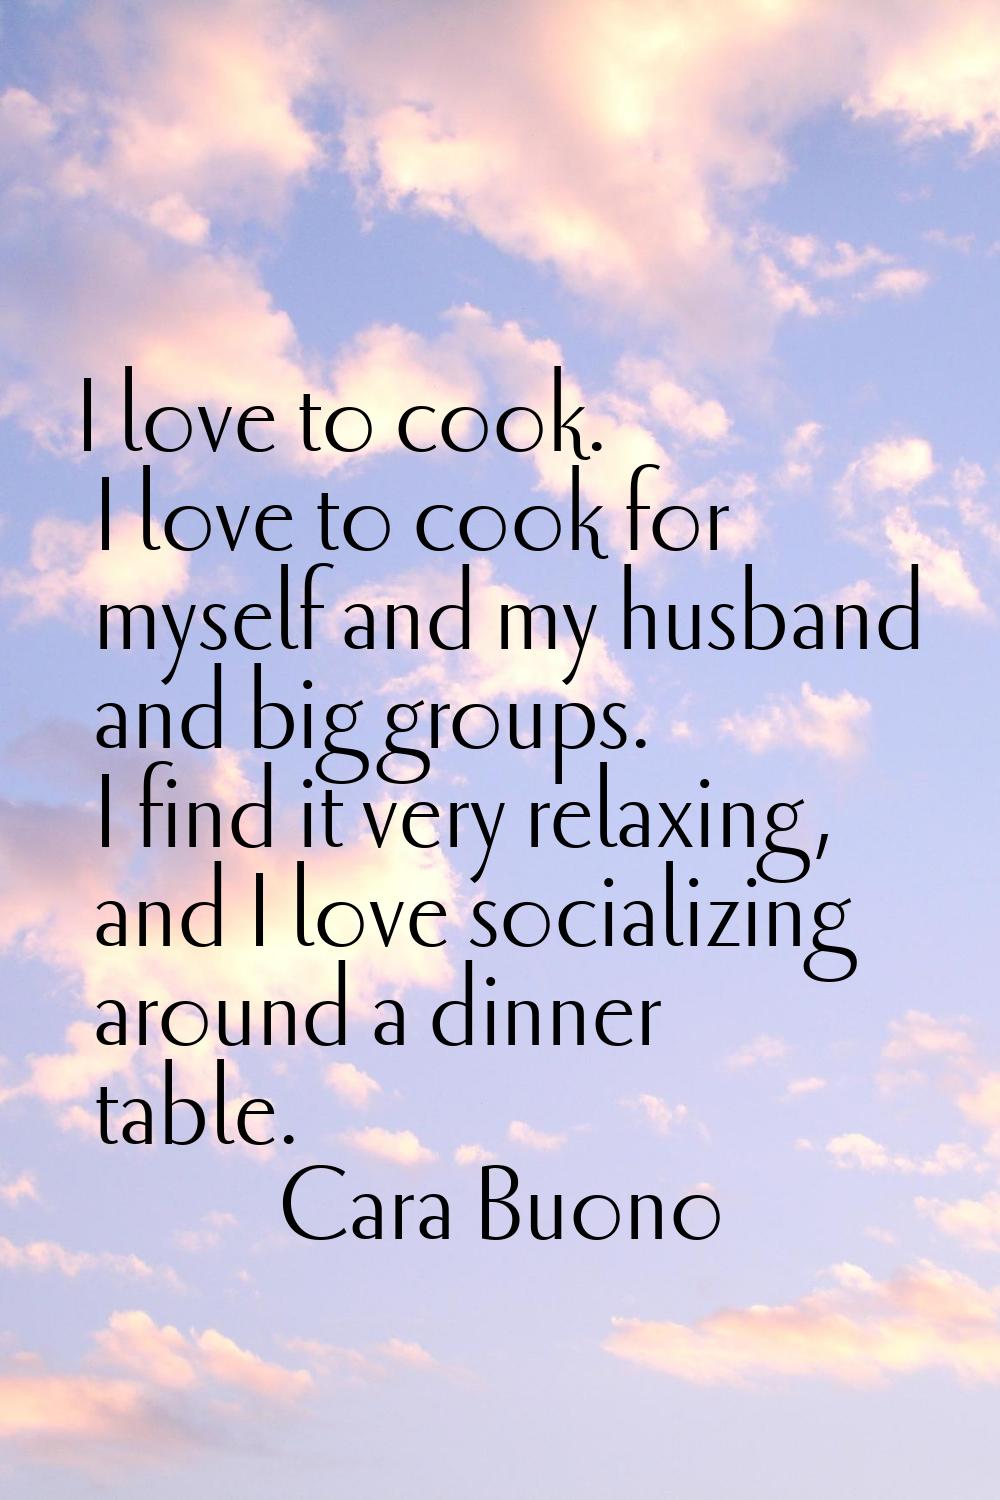 I love to cook. I love to cook for myself and my husband and big groups. I find it very relaxing, a